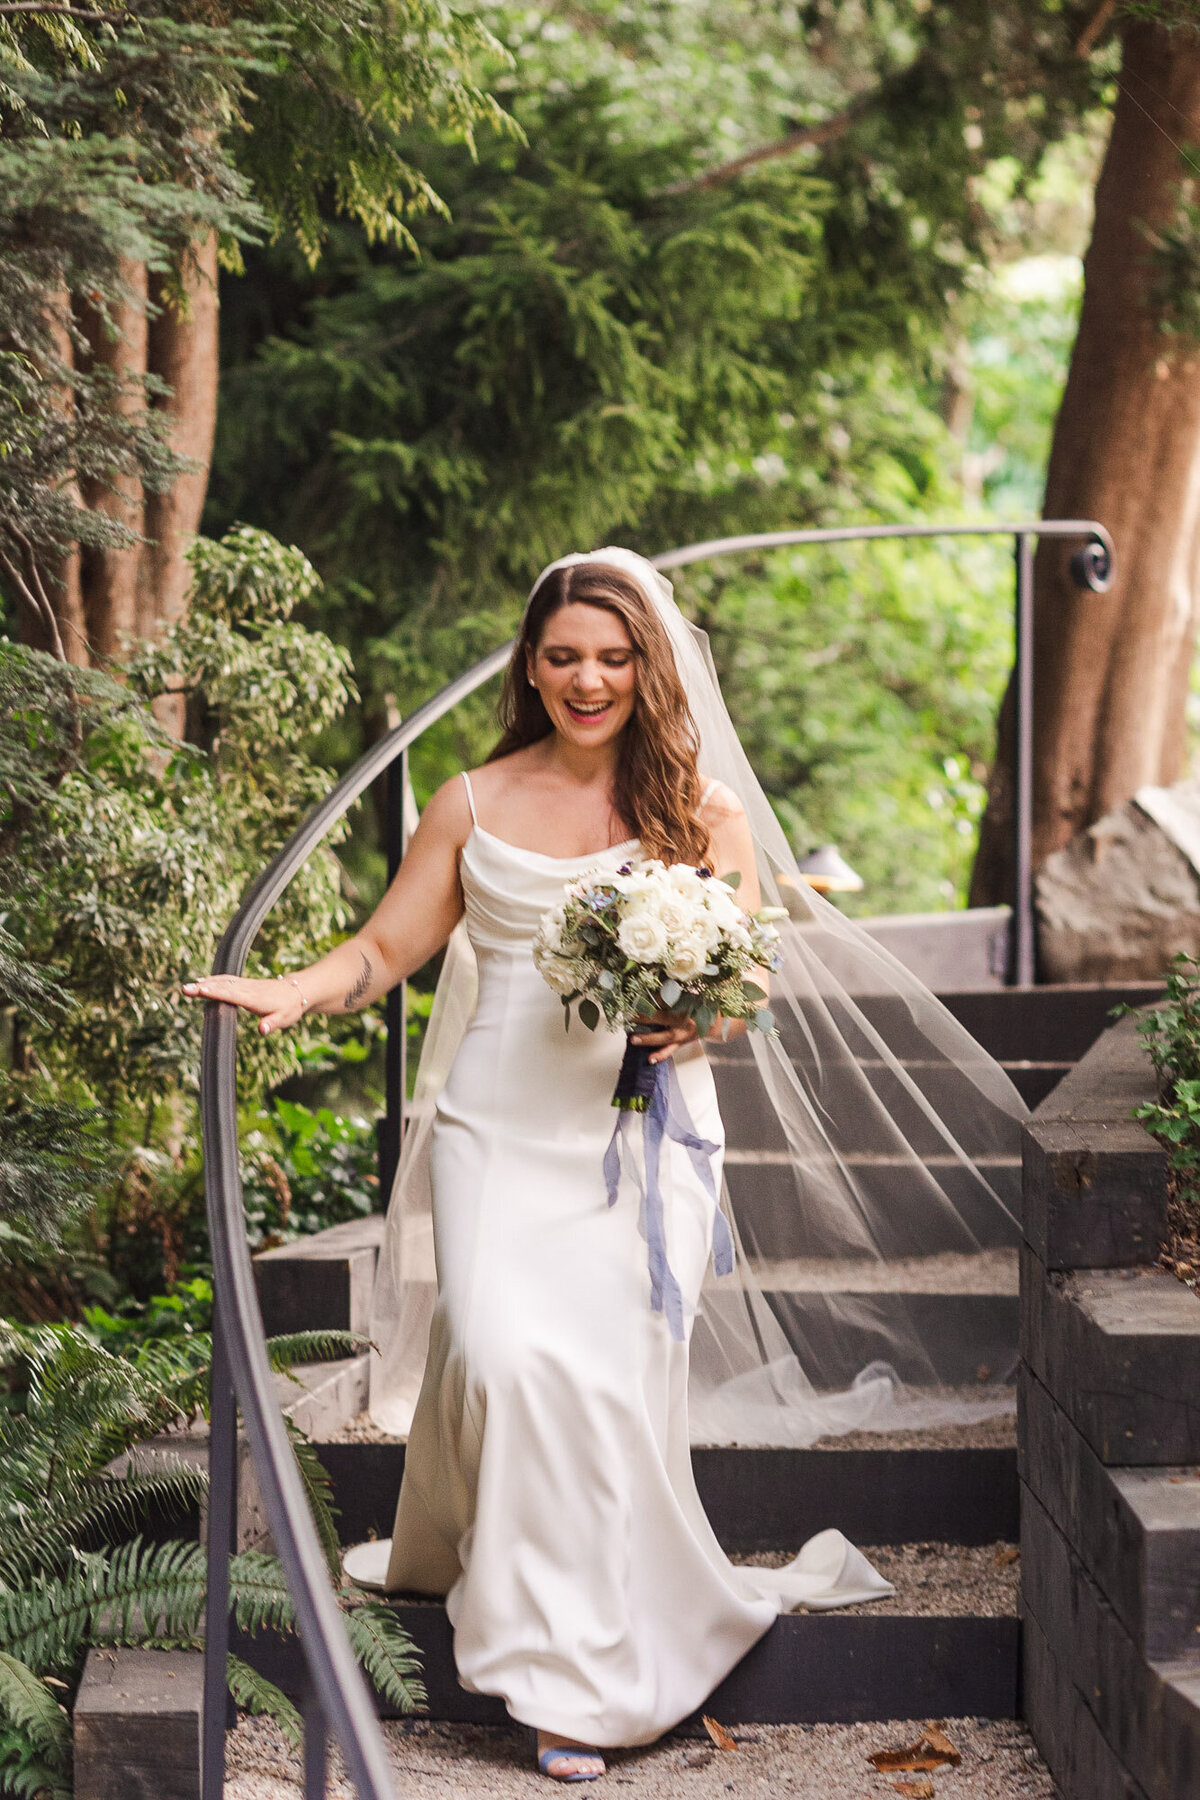 Bride-walks-down-steps-to-ceremony-in-wedding-dress-with-beautiful-white-flowers-at-winery-JM-Cellars-in-Woodinville-WA-near-Seattle-photo-by-Joanna-Monger-Photography